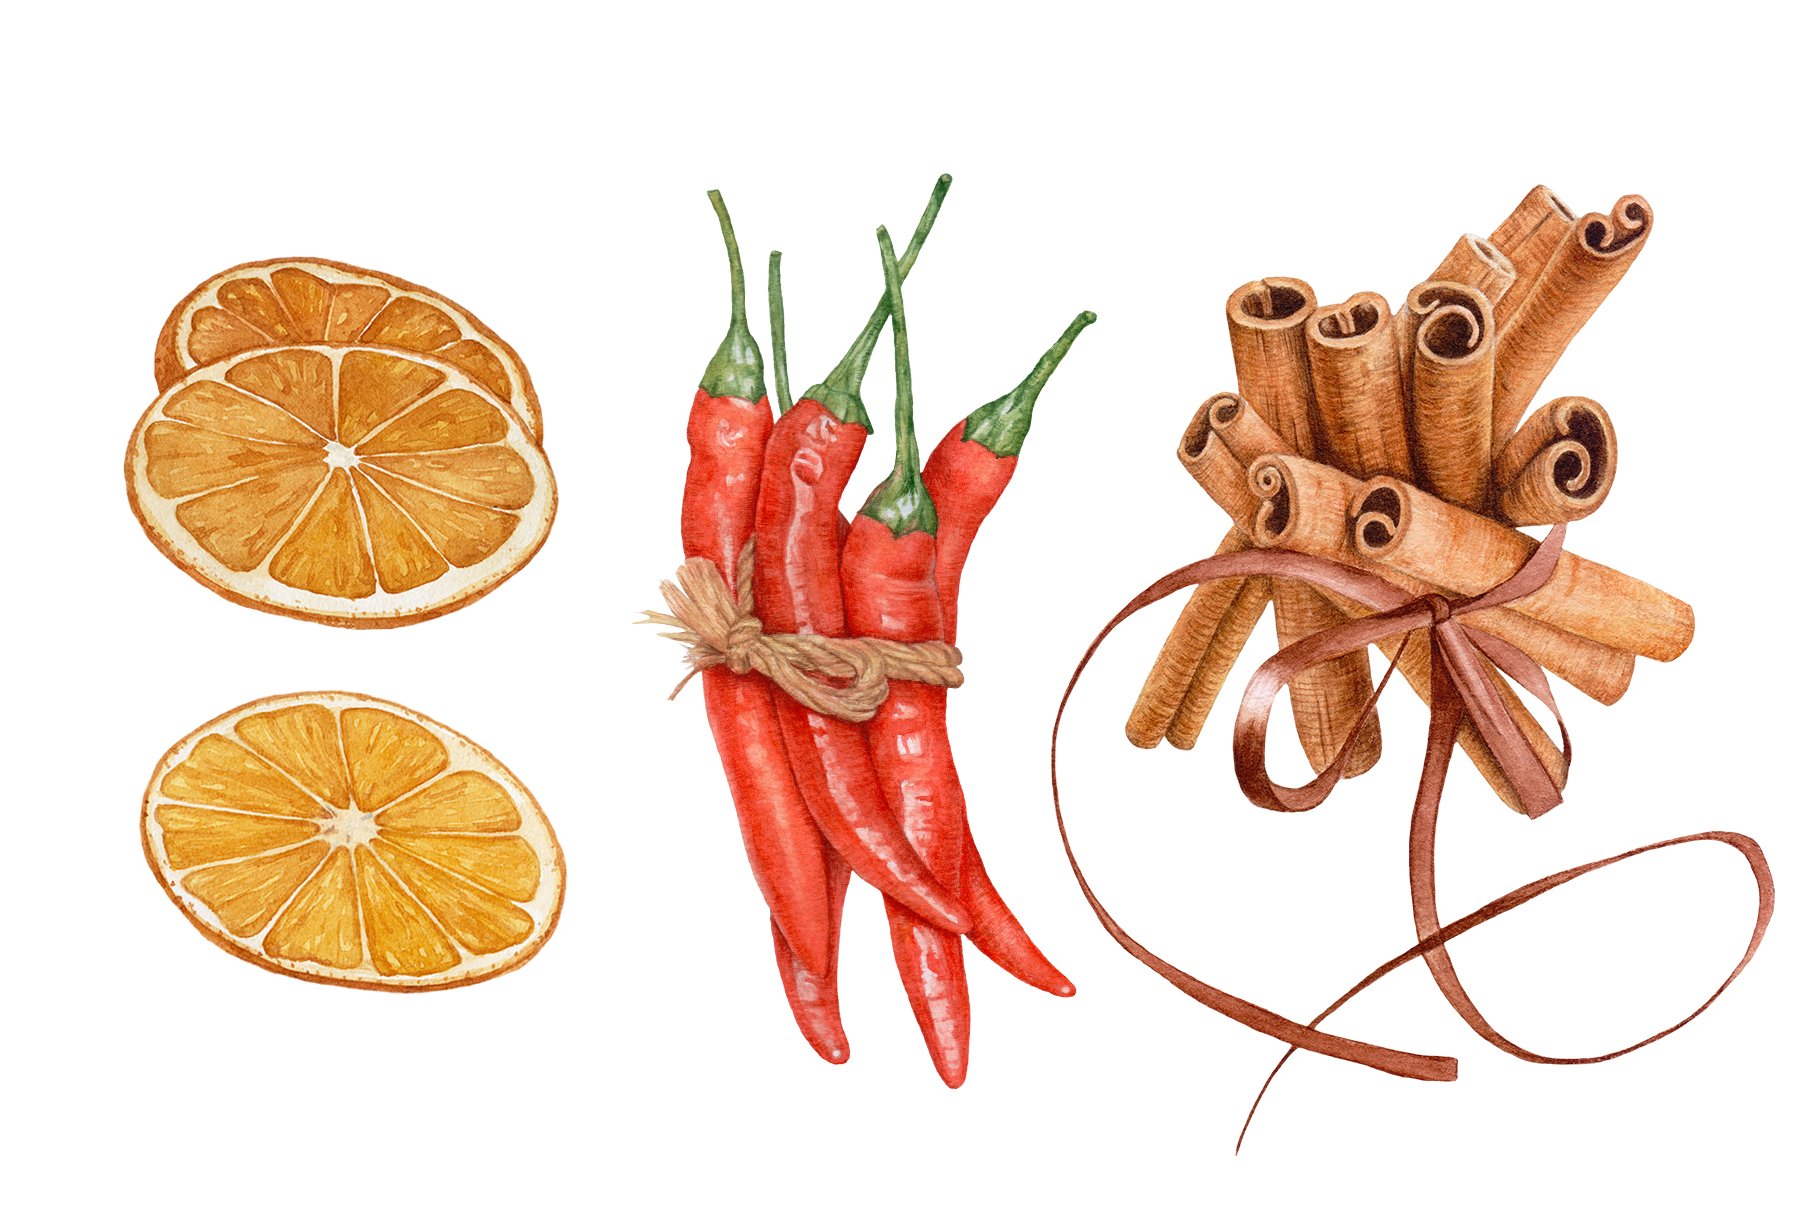 Some spices - dry lemon, pepper and cinnamons for your tasty graphic.